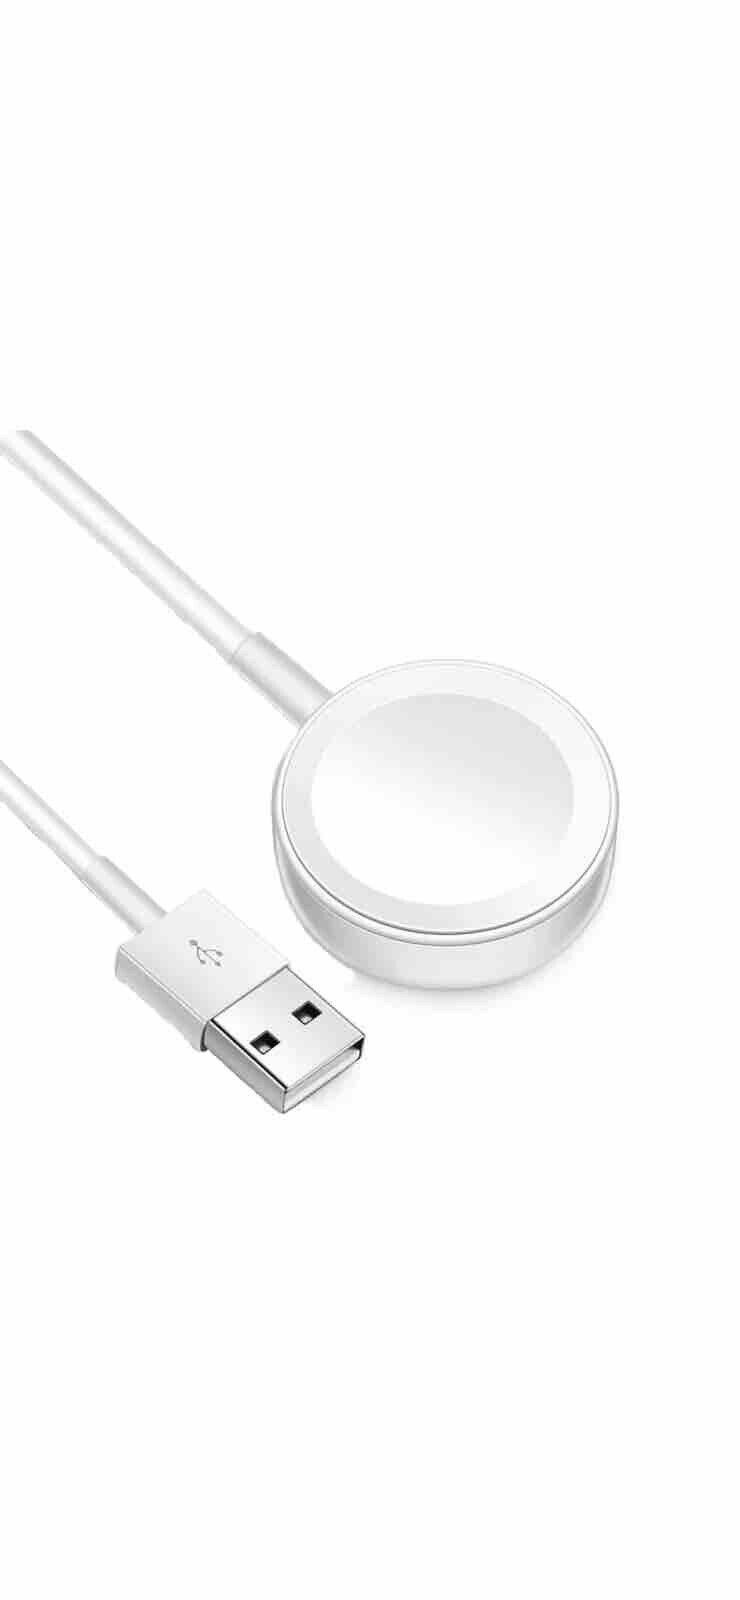 USB Magnetic Charger Cable Dock For Apple Watch iWatch Series 2/3/4/5/6/SE/7/8